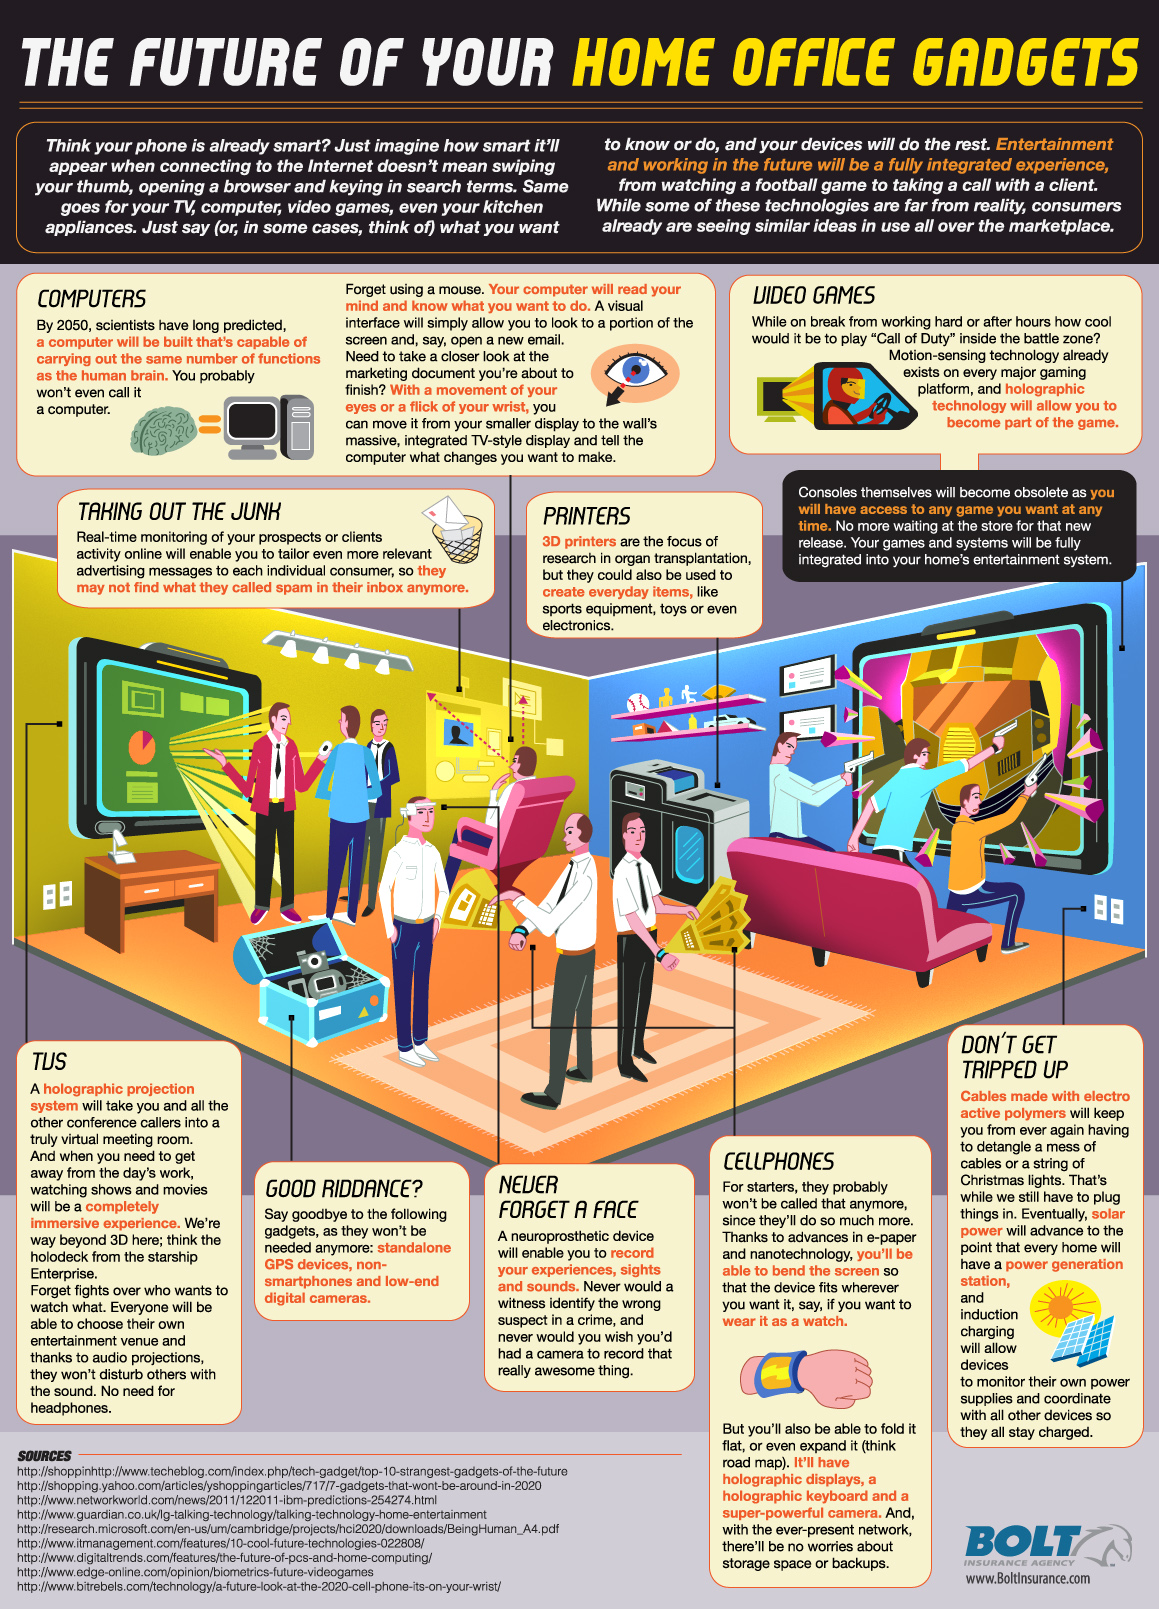 Future of Your Home Office Gadgets Infographic